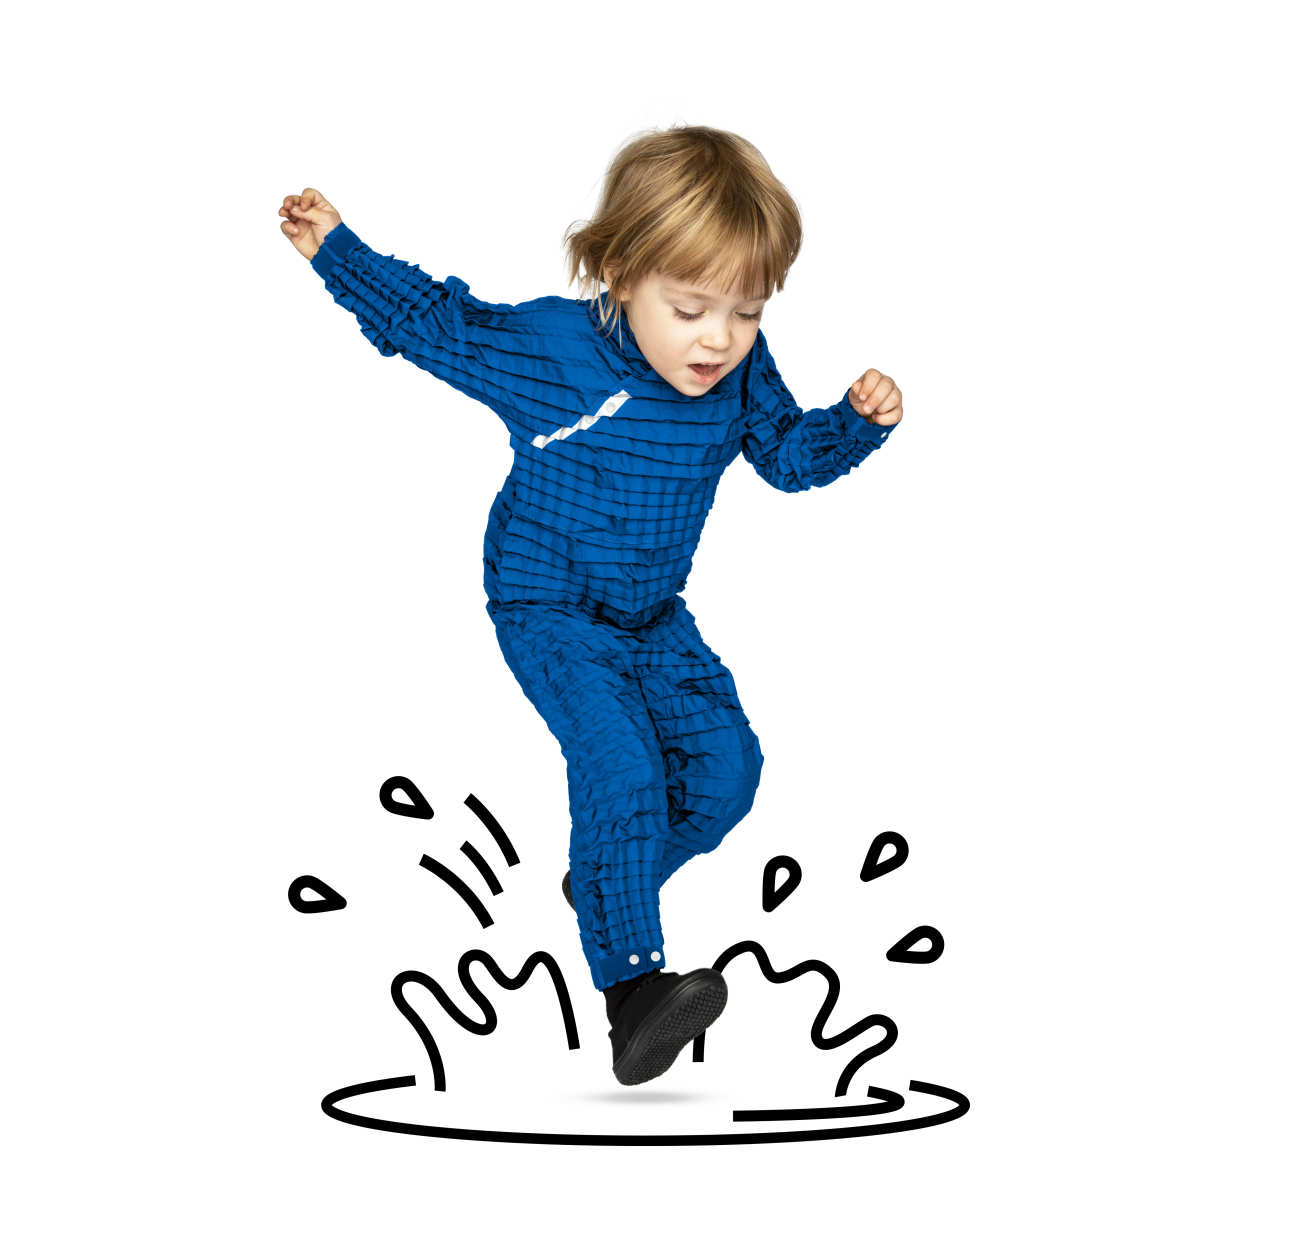 A child jumping in a puddle